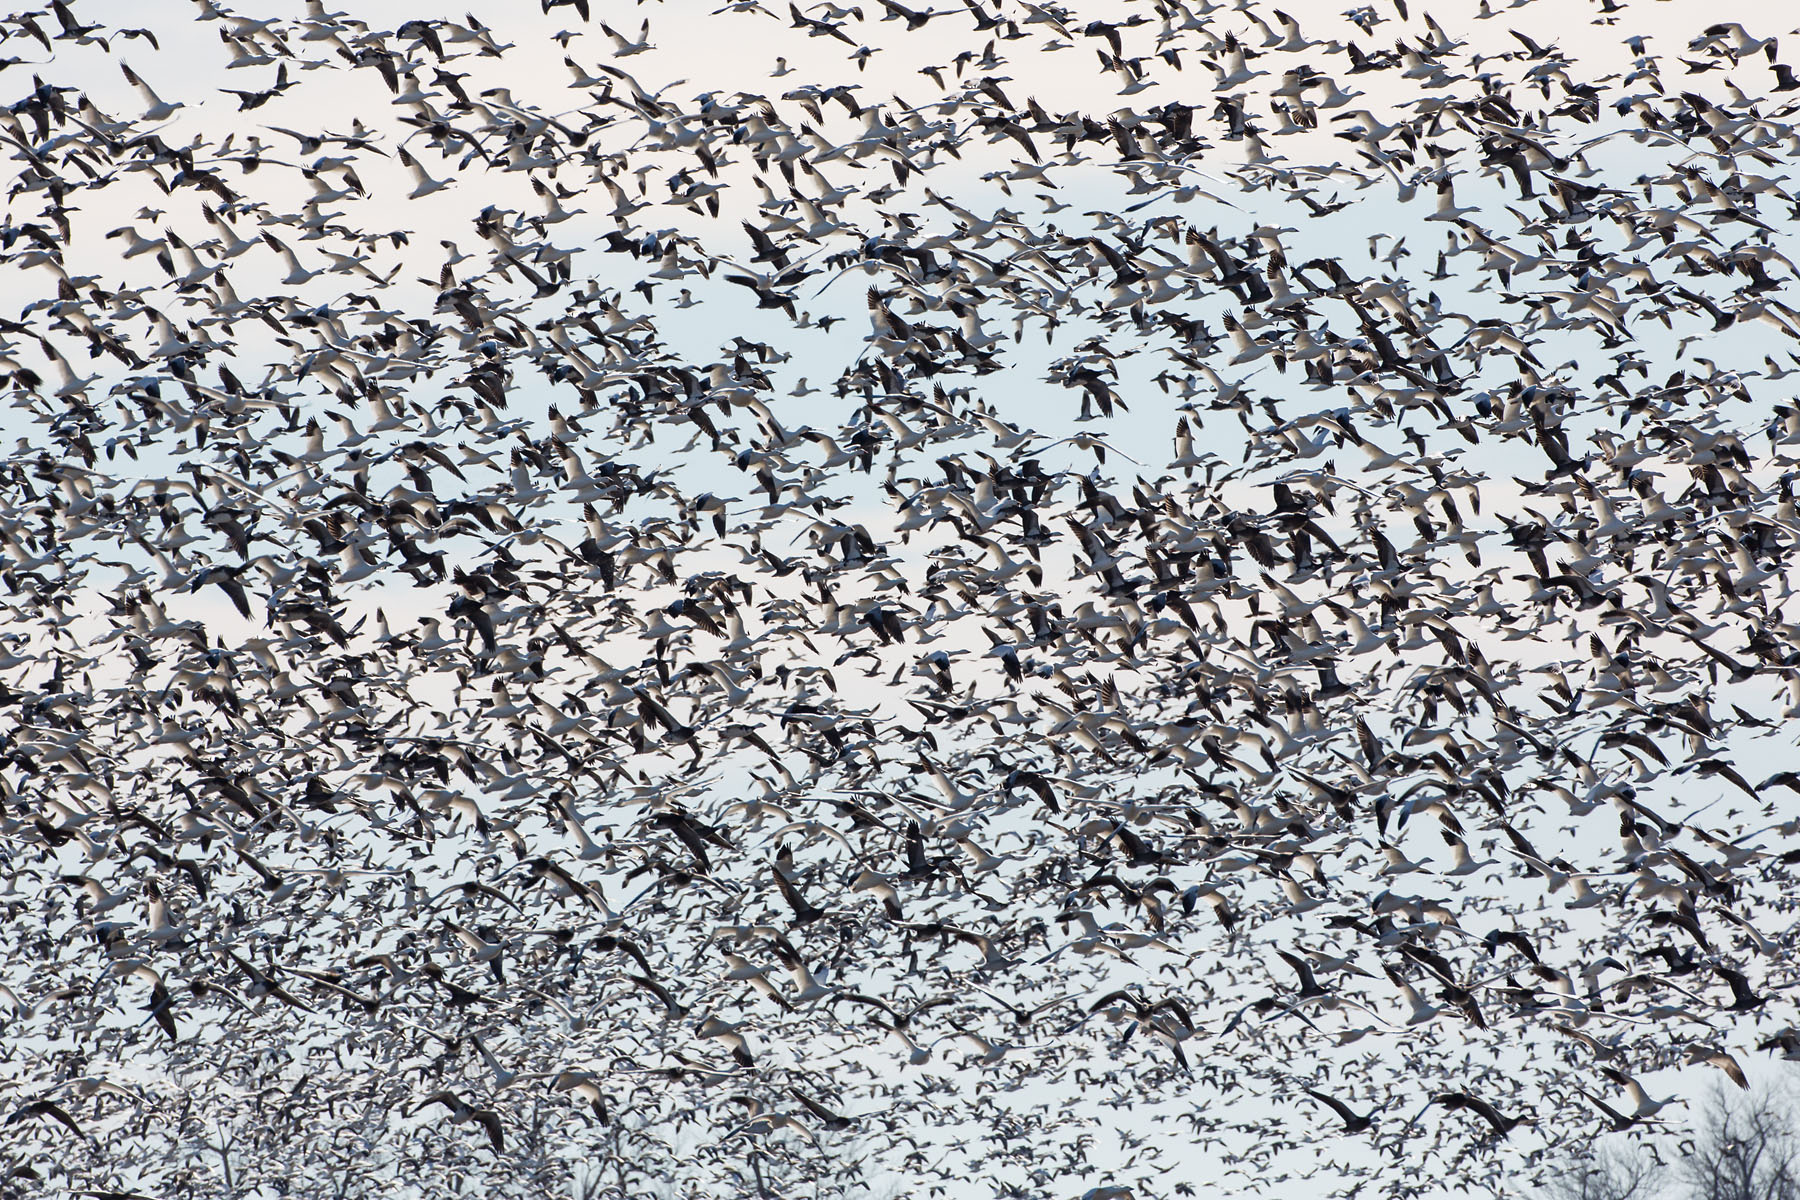 Snow geese, Loess Bluffs NWR.  Click for next photo.